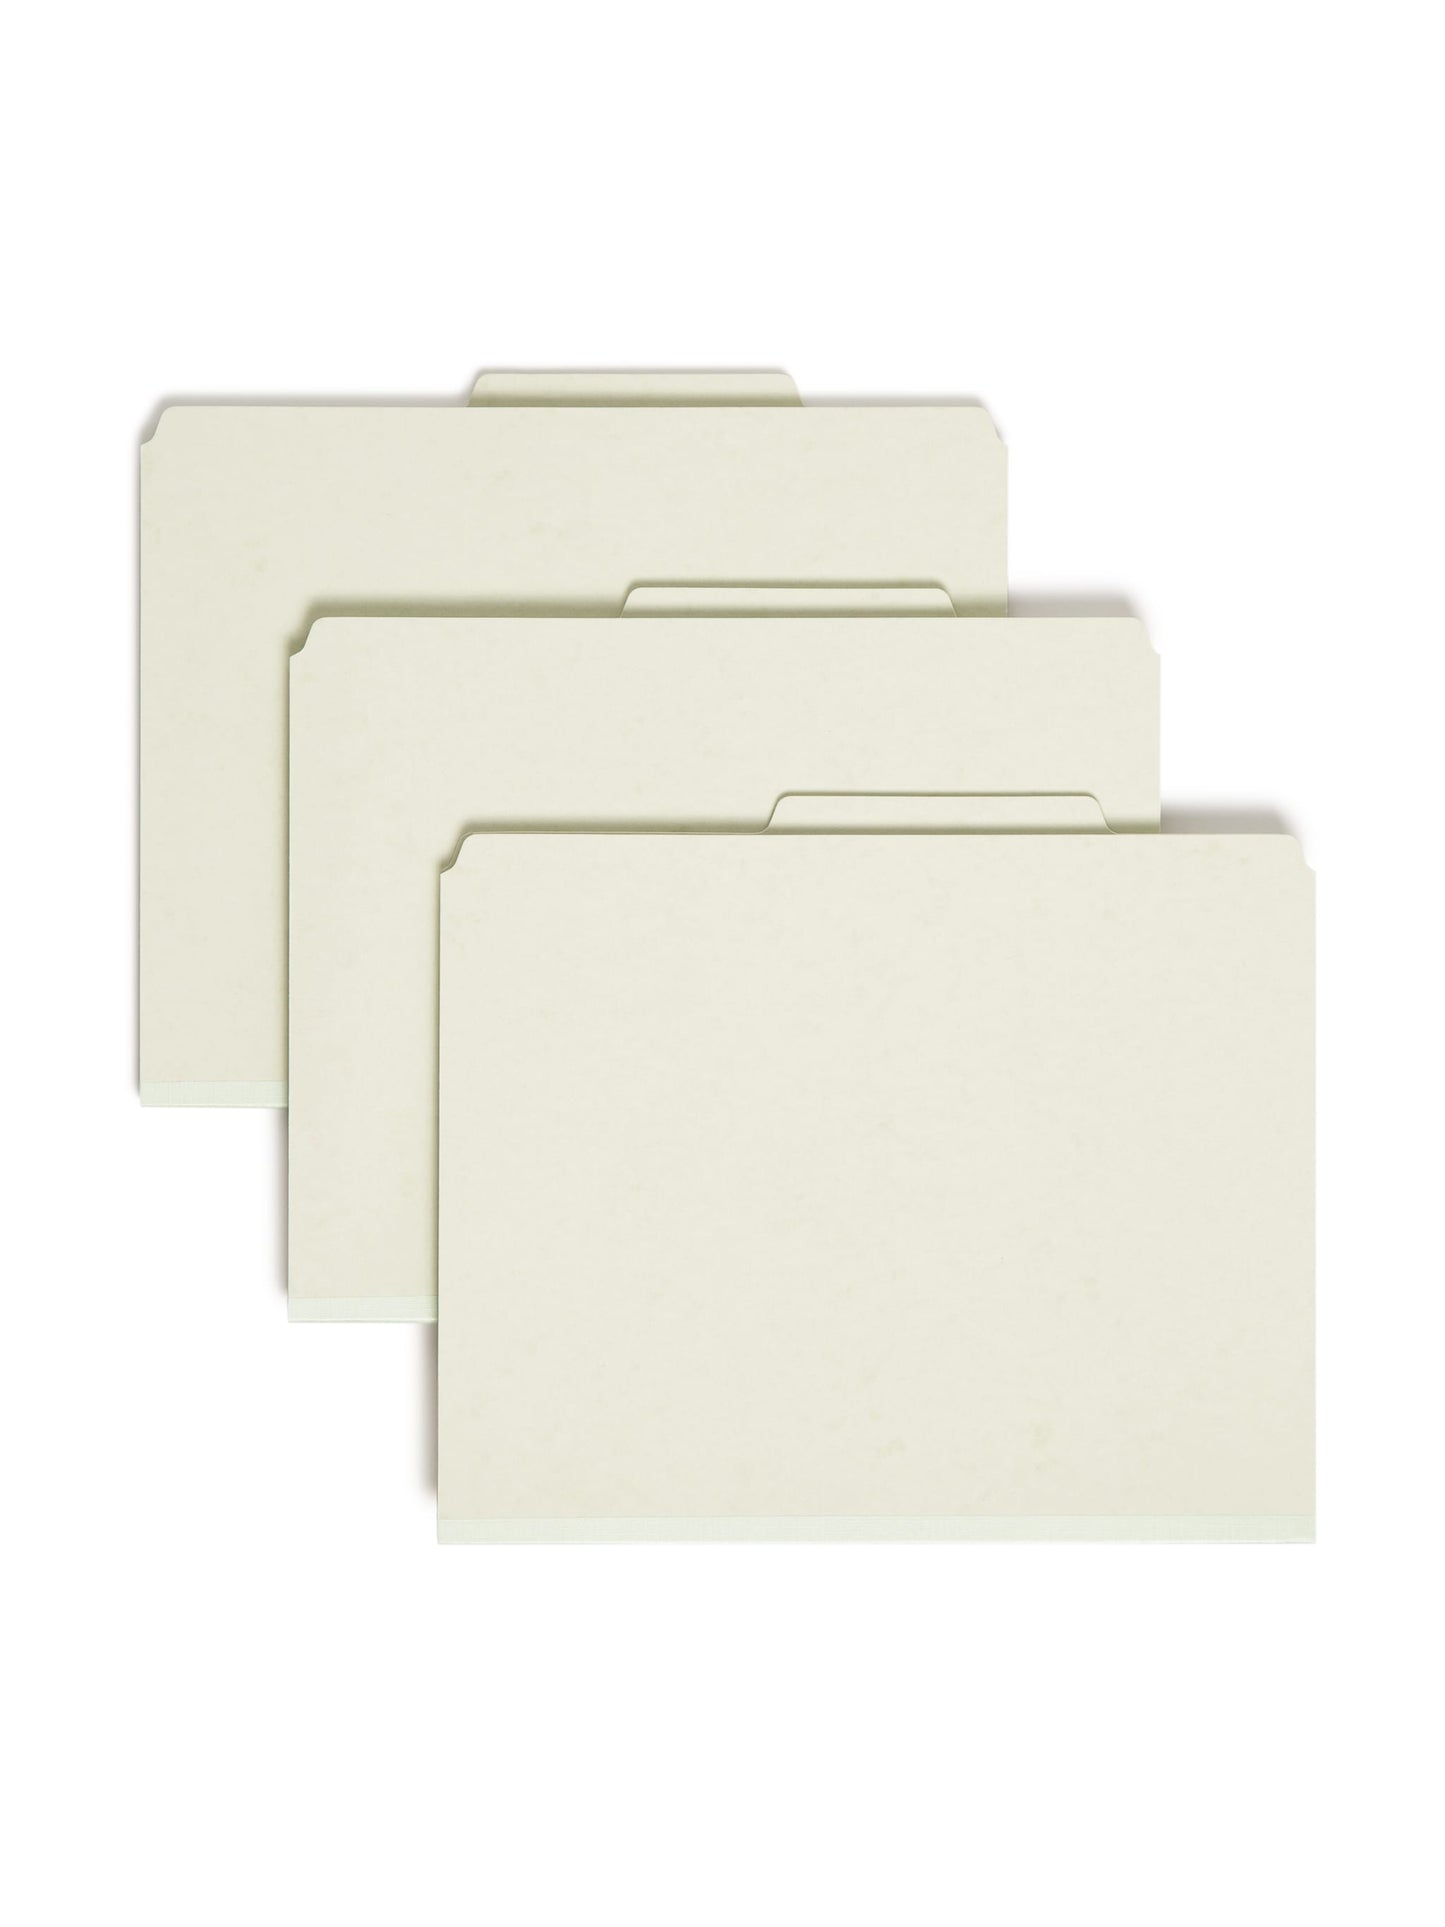 SafeSHIELD® Pressboard Classification File Folders, 3 Dividers, 3 inch Expansion, 2/5-Cut Tab, Gray/Green Color, Letter Size, Set of 0, 30086486140912